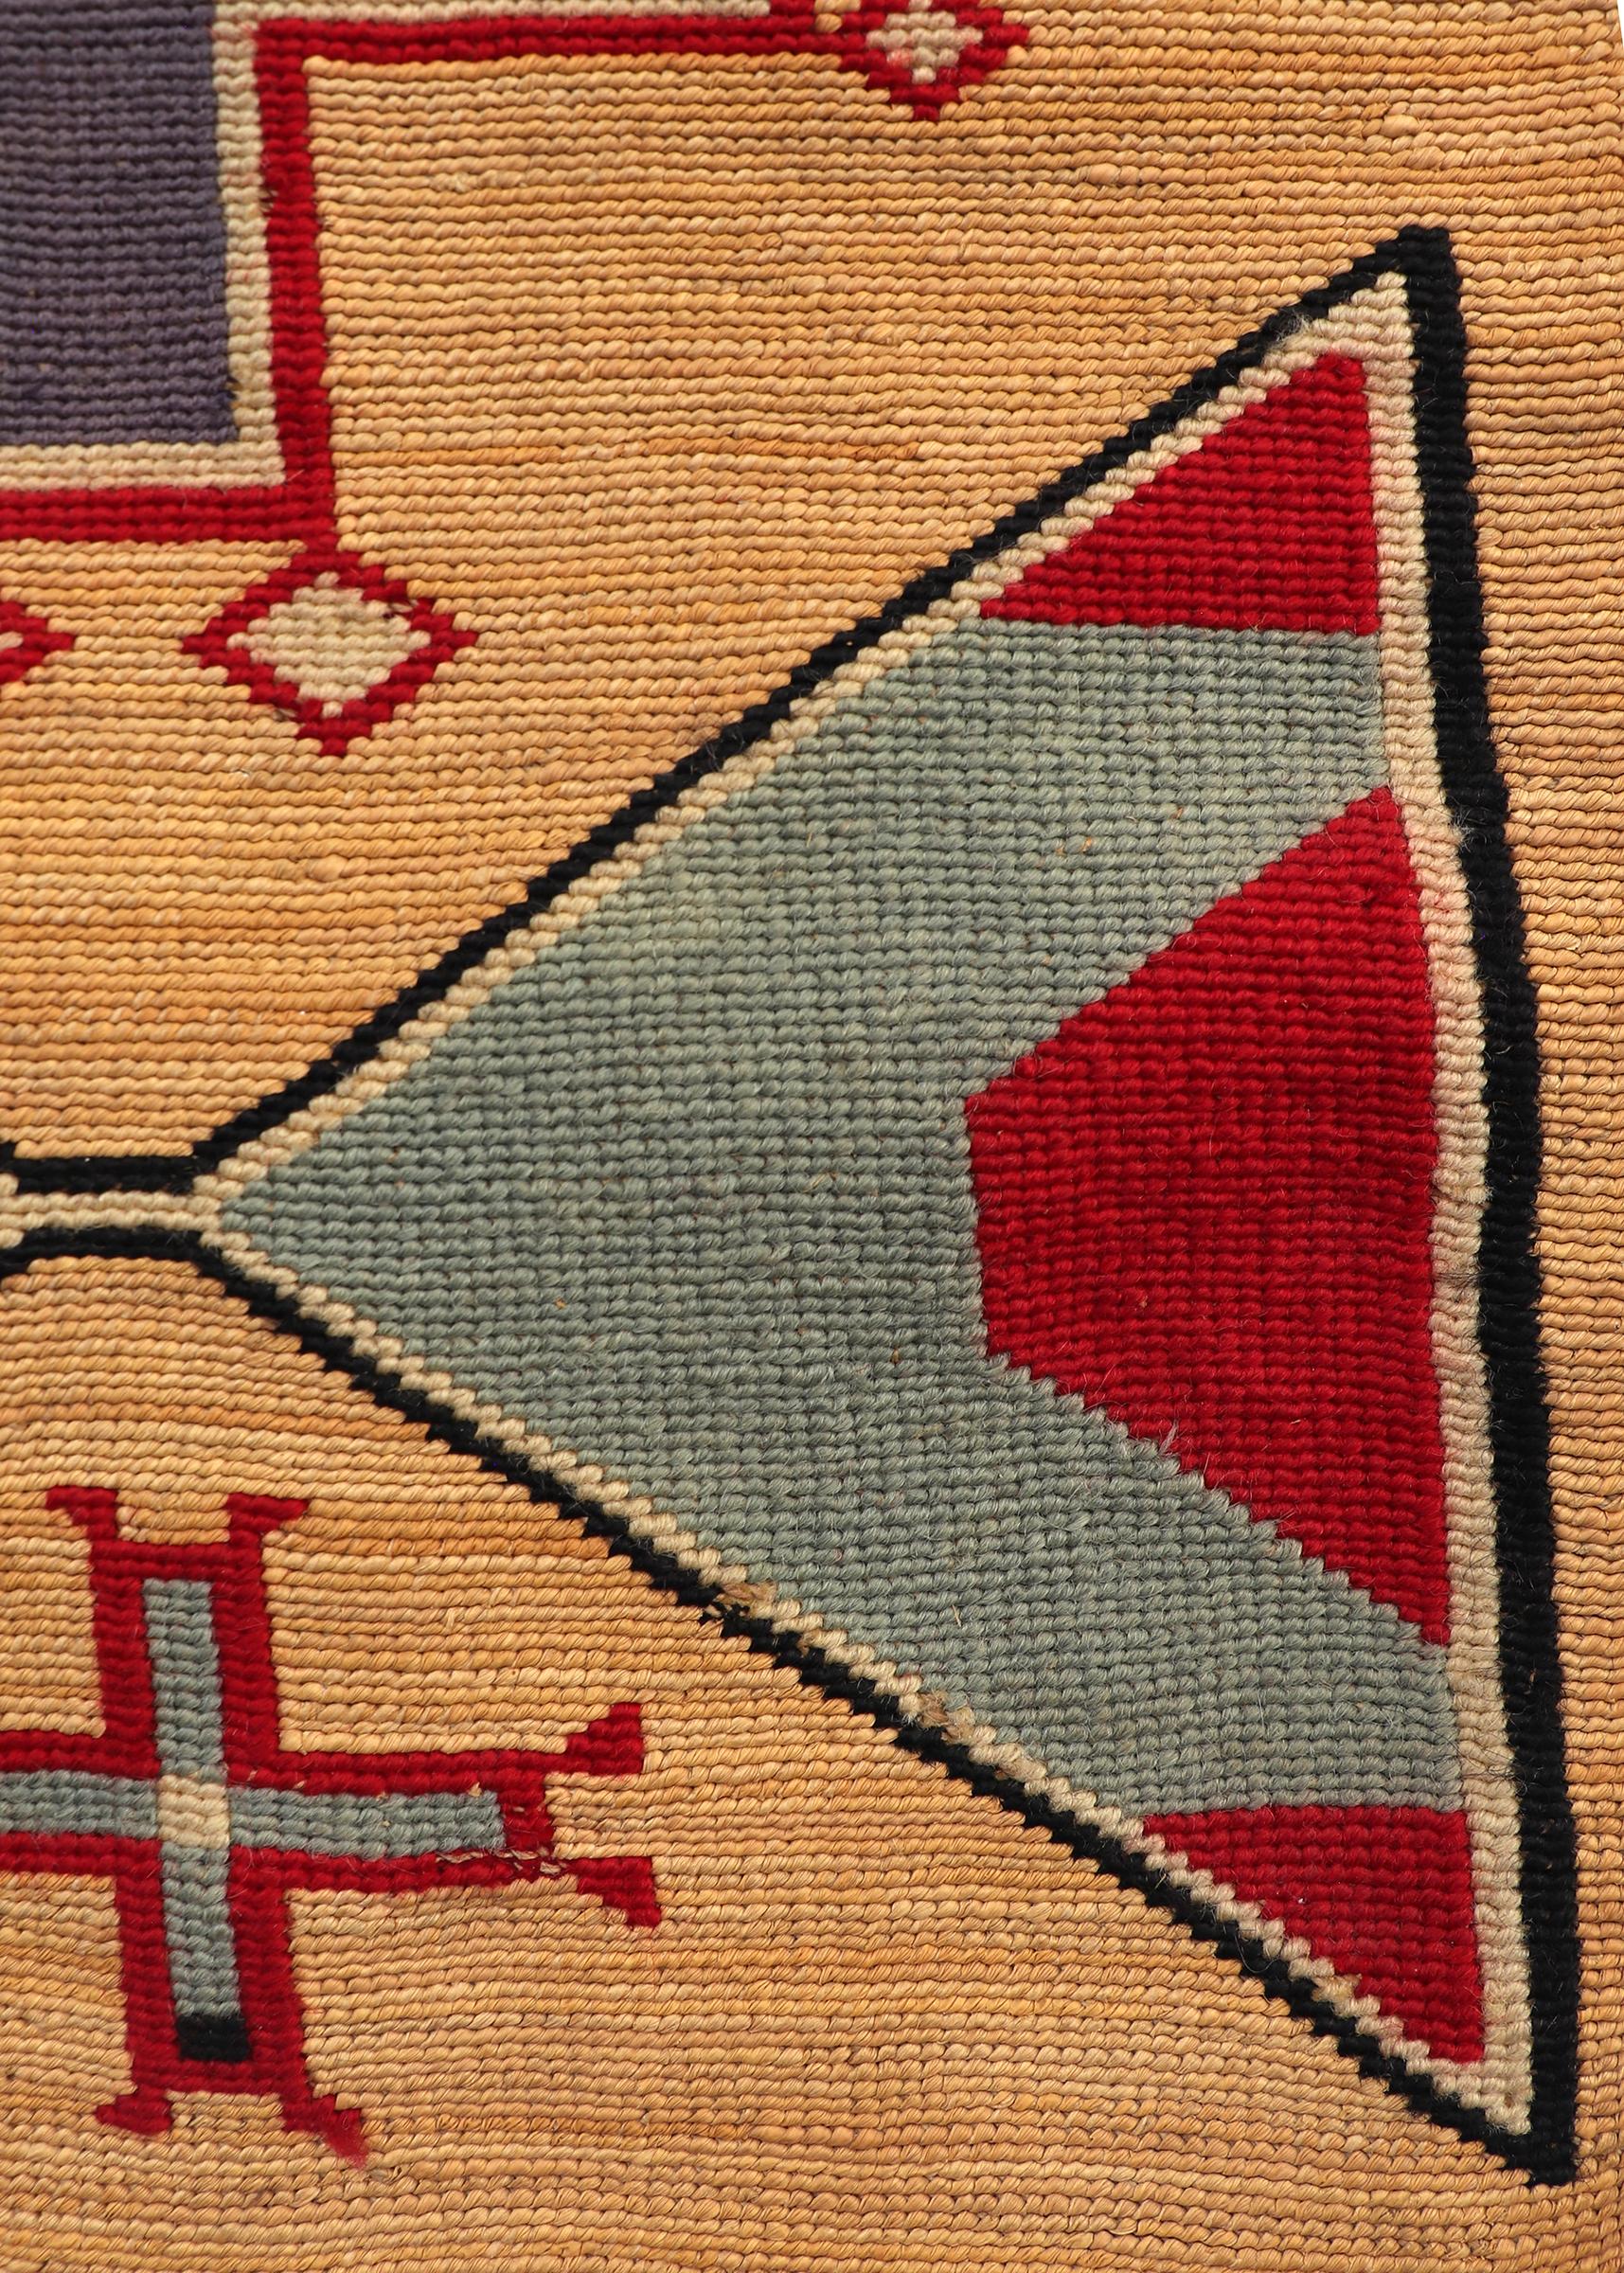 Native American 1890s Plateau Cornhusk Bag with Blue, Red, and Yellow Geometric Designs